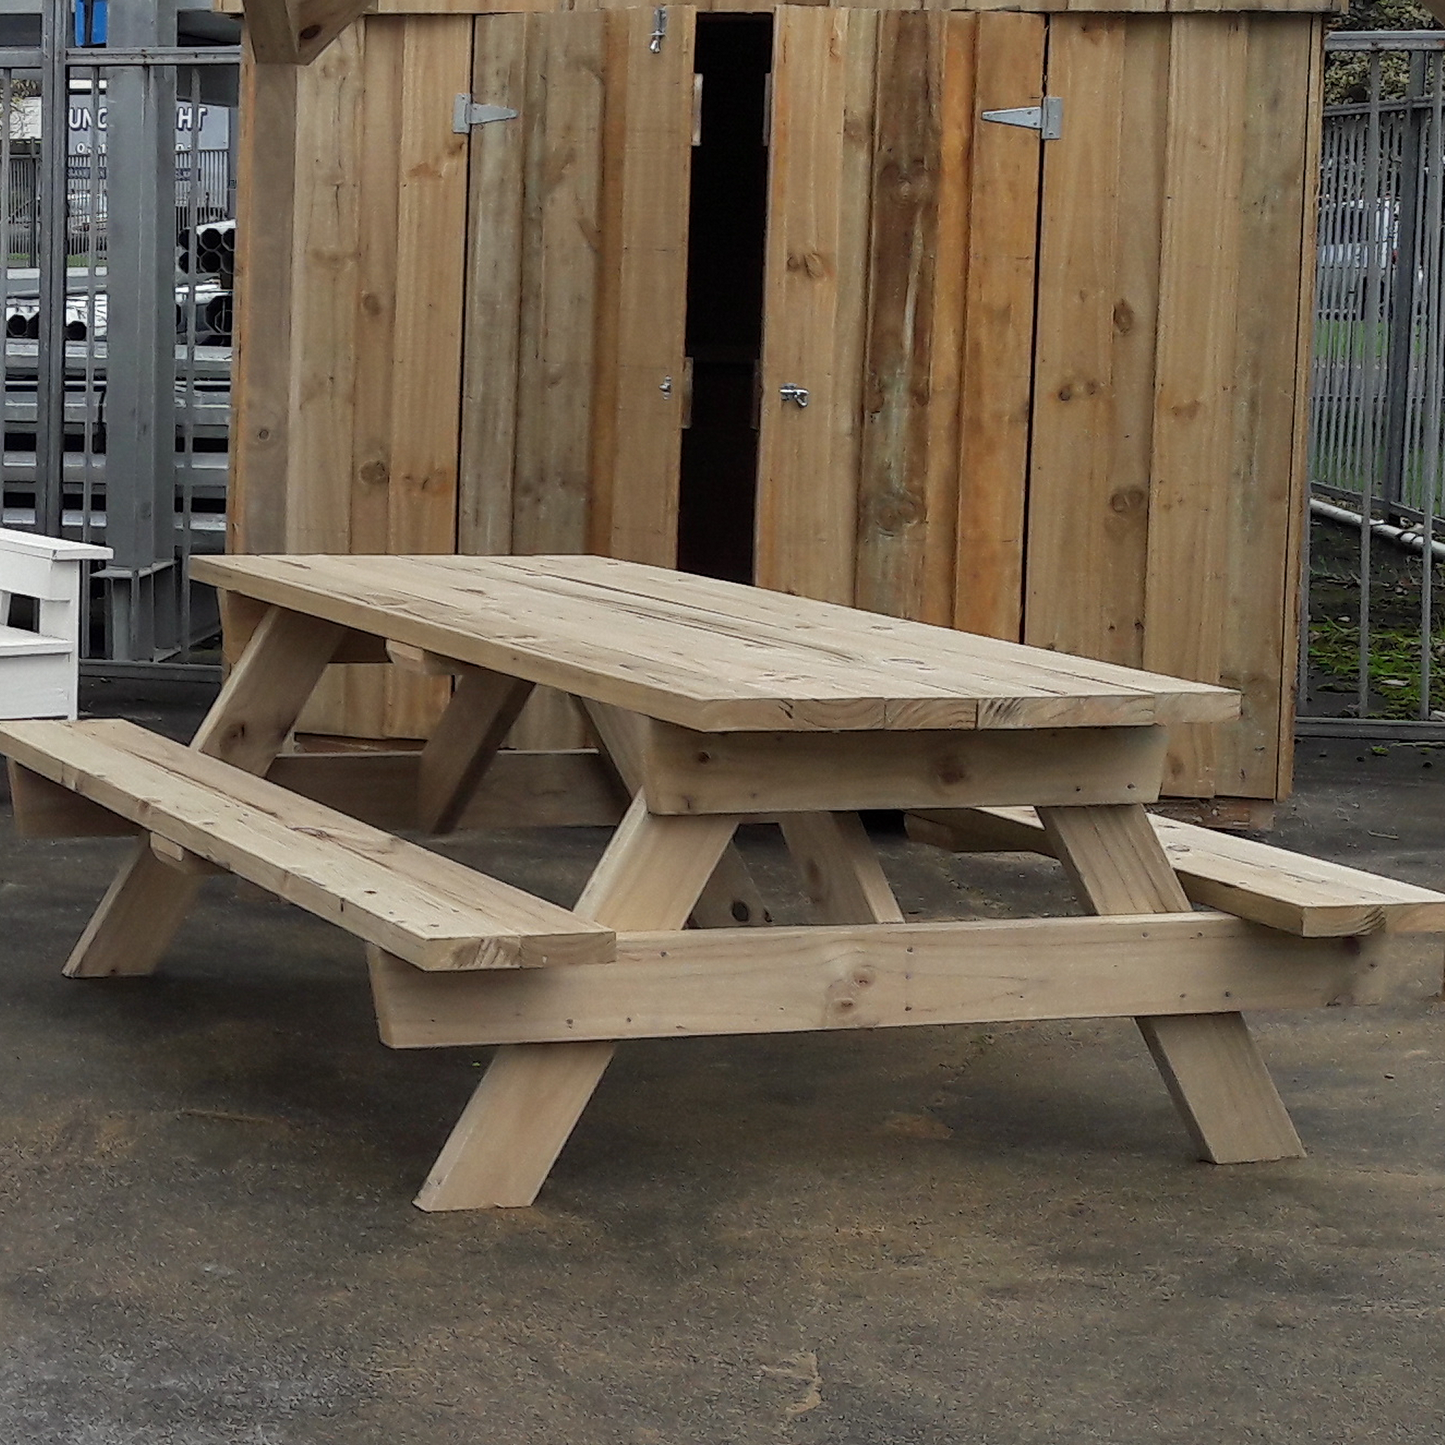 DIY plans to build a Six seater strong picnic table